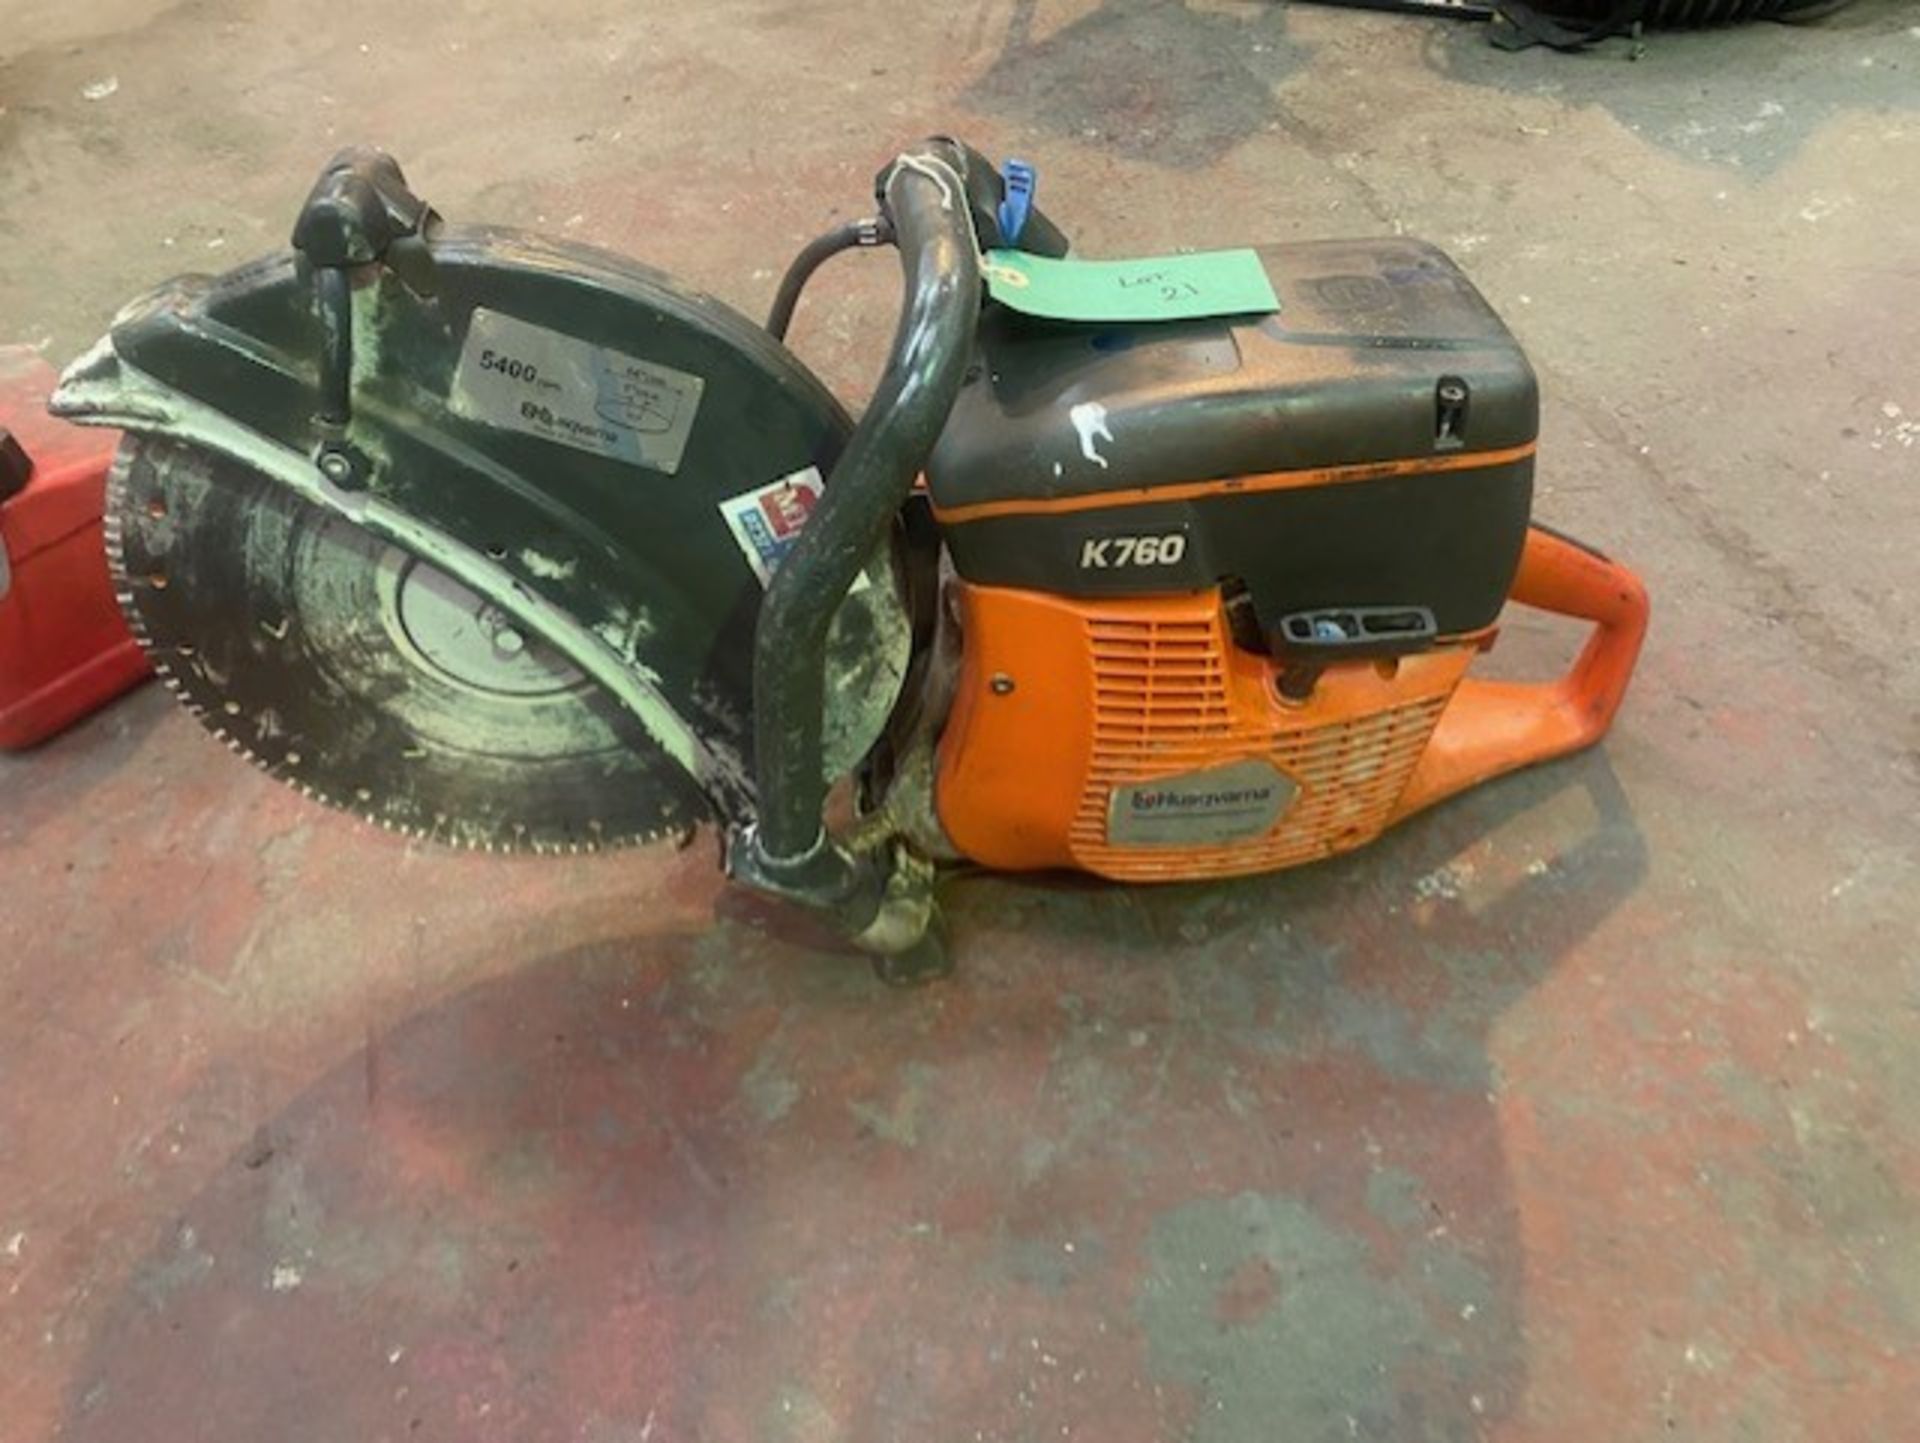 Husqvarna K760 Stone Saw with blade , sold as seen